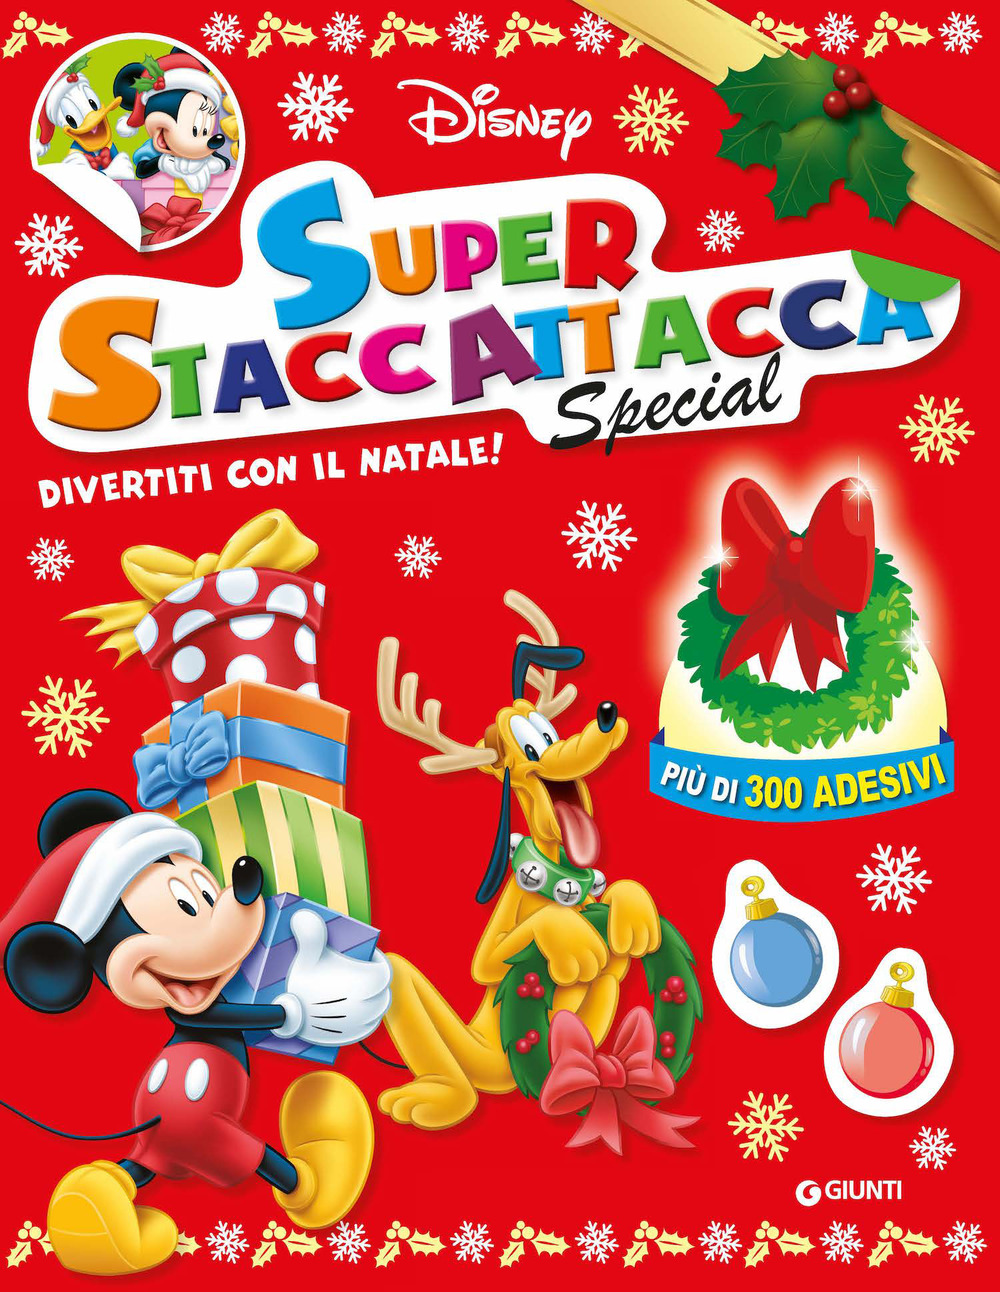 Natale. Superstaccattacca special